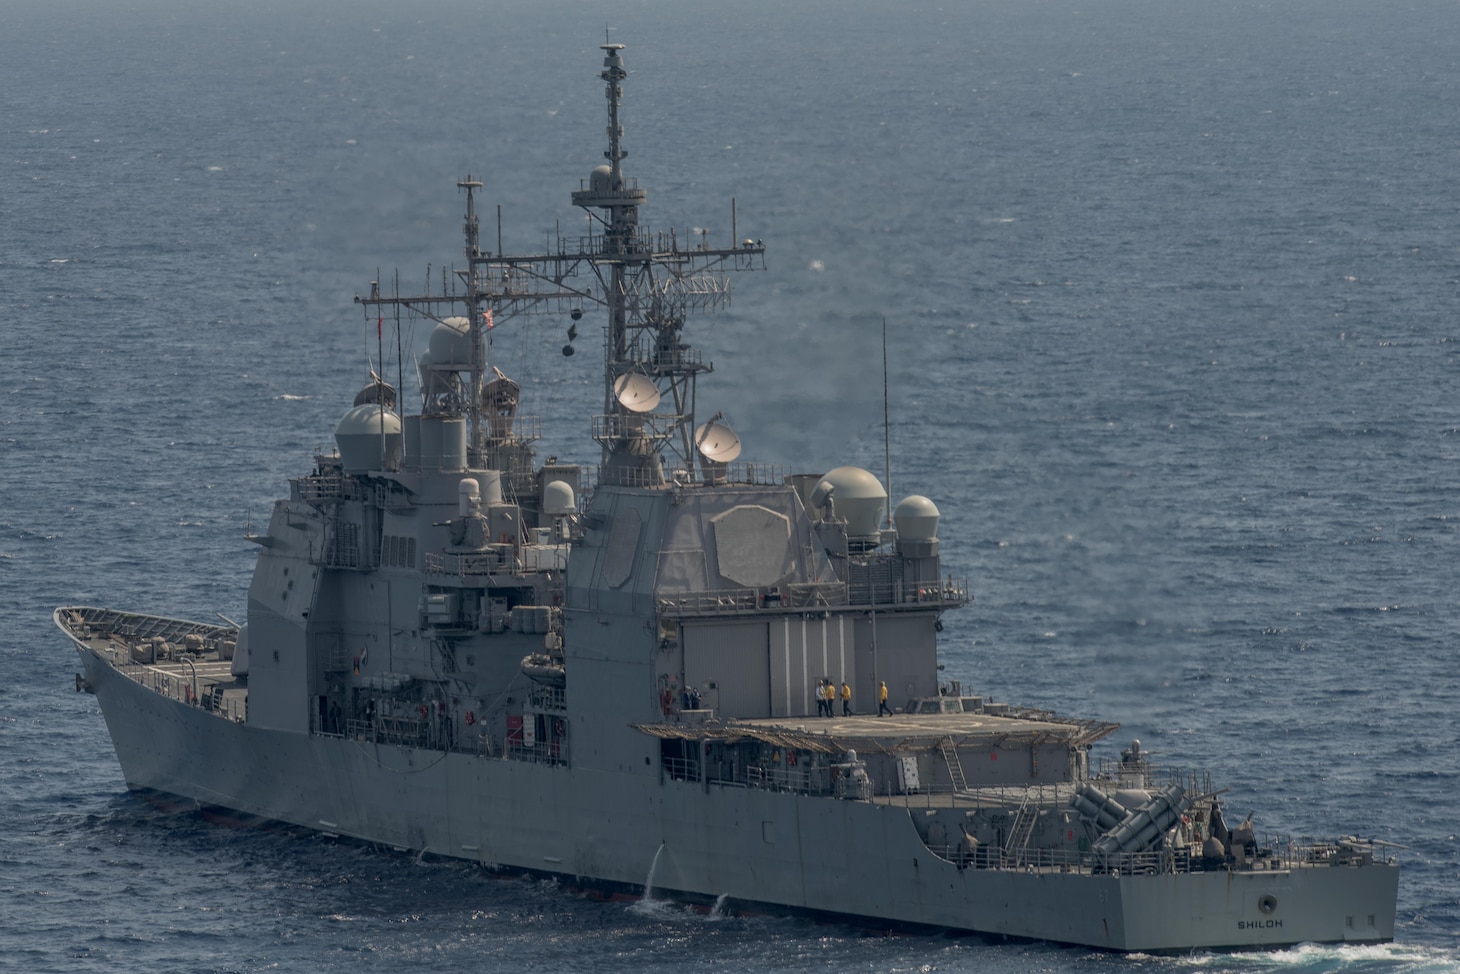 WATERS SOUTH OF JAPAN (May 22, 2017) The Ticonderoga-class guided missile cruiser USS Shiloh (CG 67) patrols the waters South of Japan. Carrier Strike Group 5 provides a combat-ready force that protects and defends the collective maritime interests of its allies and partners in the Indo-Asia-Pacific region. (U.S. Navy photo by Mass Communications Specialist 2nd Class Nathan Burke/Released)